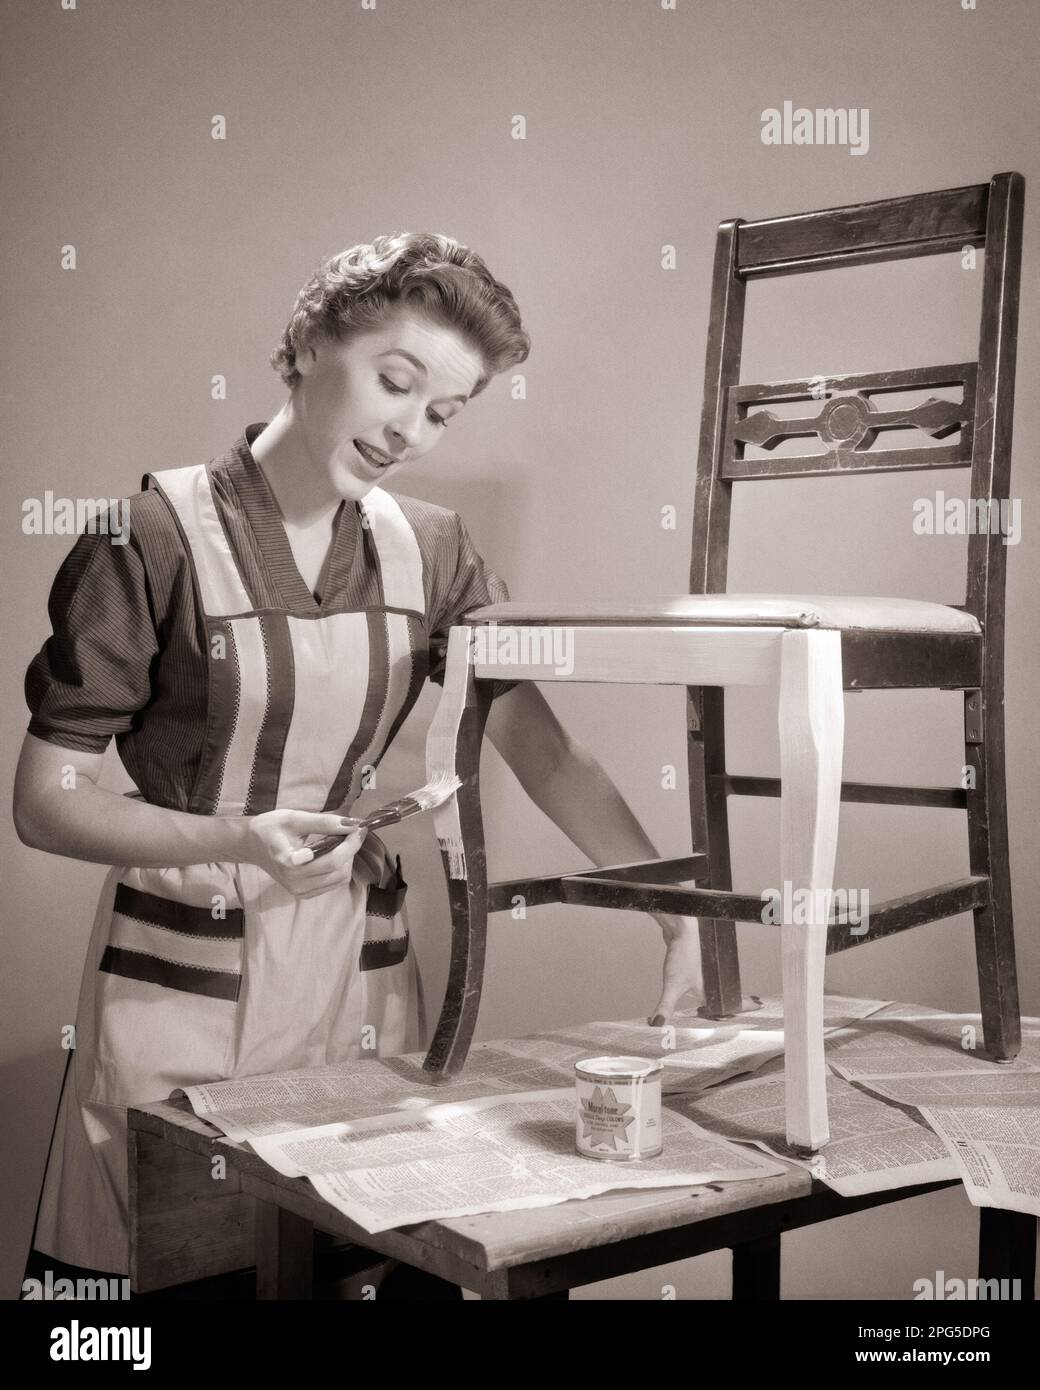 1950s HOUSEWIFE WEARING APRON PAINTING DARK WOOD DINING ROOM CHAIR LIGHTER COLOR ON TABLE COVERED WITH NEWSPAPER FOR PROTECTION  - p1942 DEB001 HARS PERSONS INSPIRATION CARING CONFIDENCE B&W HOMEMAKER COVERED HOMEMAKERS CHORE LEISURE PROTECTION HOUSEWIVES PAINTED TASKS DEB001 LIGHTER PRIMER CREATIVITY MID-ADULT MID-ADULT WOMAN PAINT CAN SOLUTIONS TASK BLACK AND WHITE CAUCASIAN ETHNICITY OLD FASHIONED Stock Photo